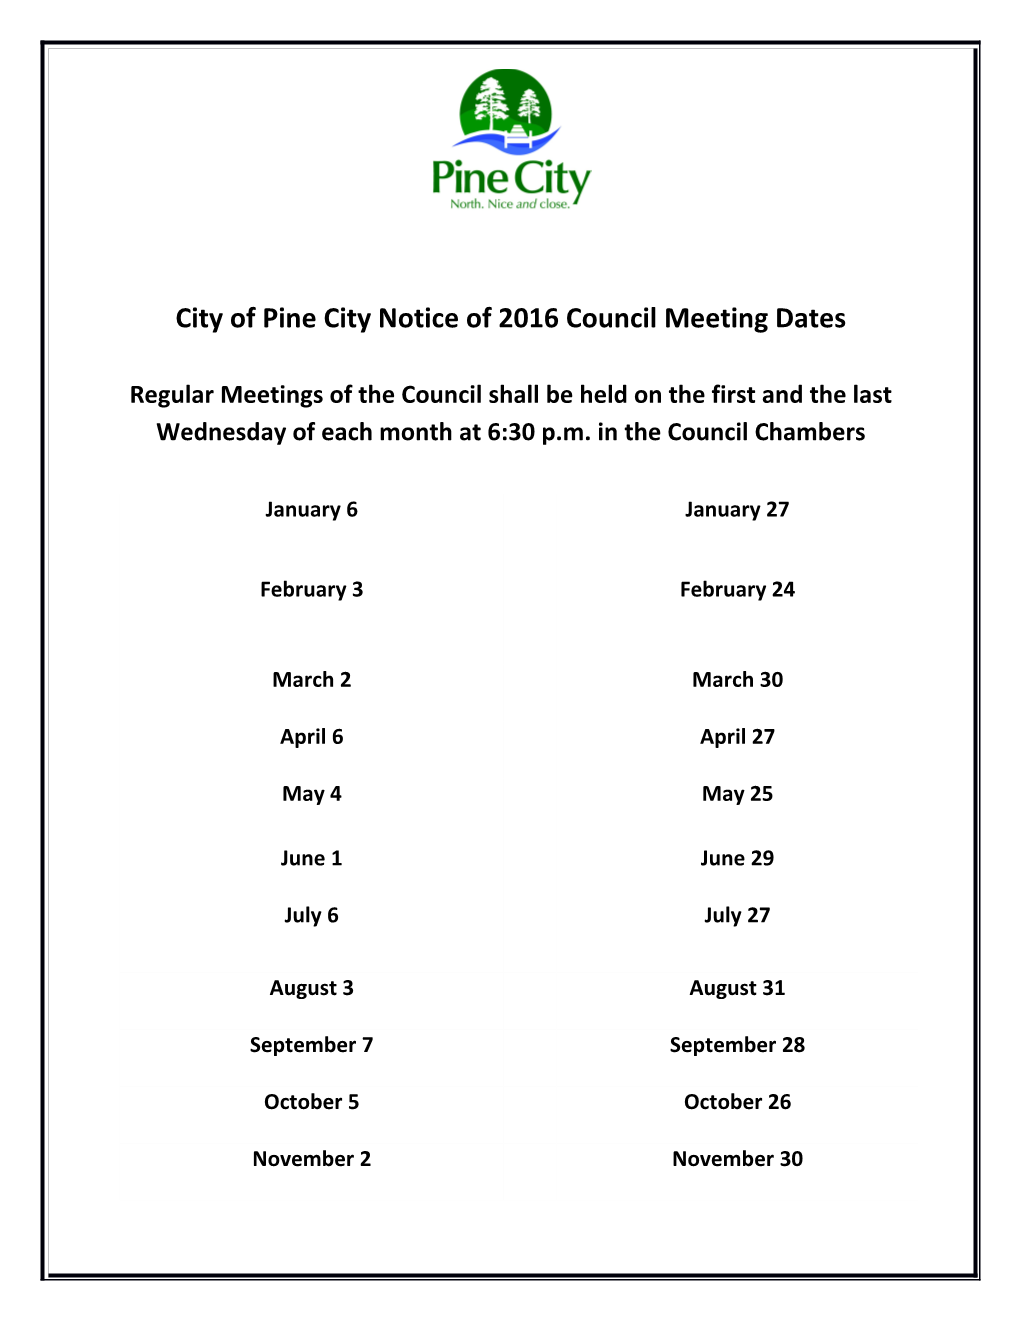 City of Pine City Notice of 2016 Council Meeting Dates